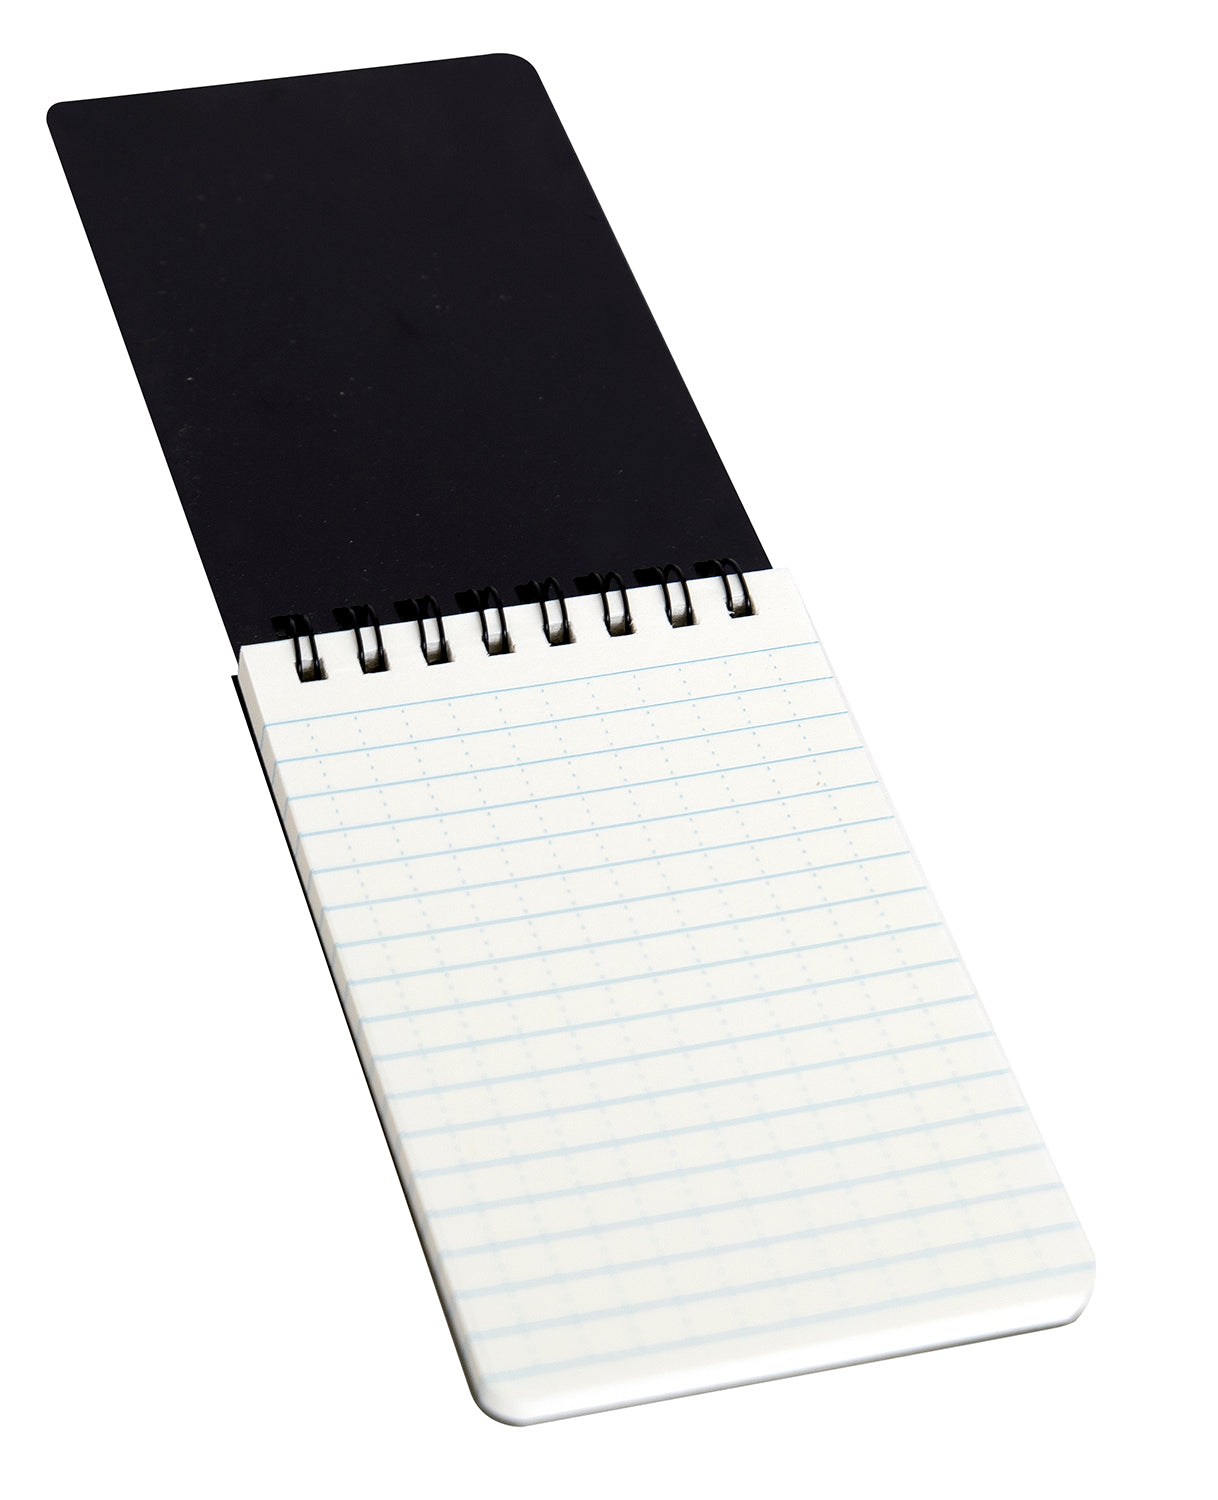  All-Weather Waterproof Notebook - Tactical Choice Plus